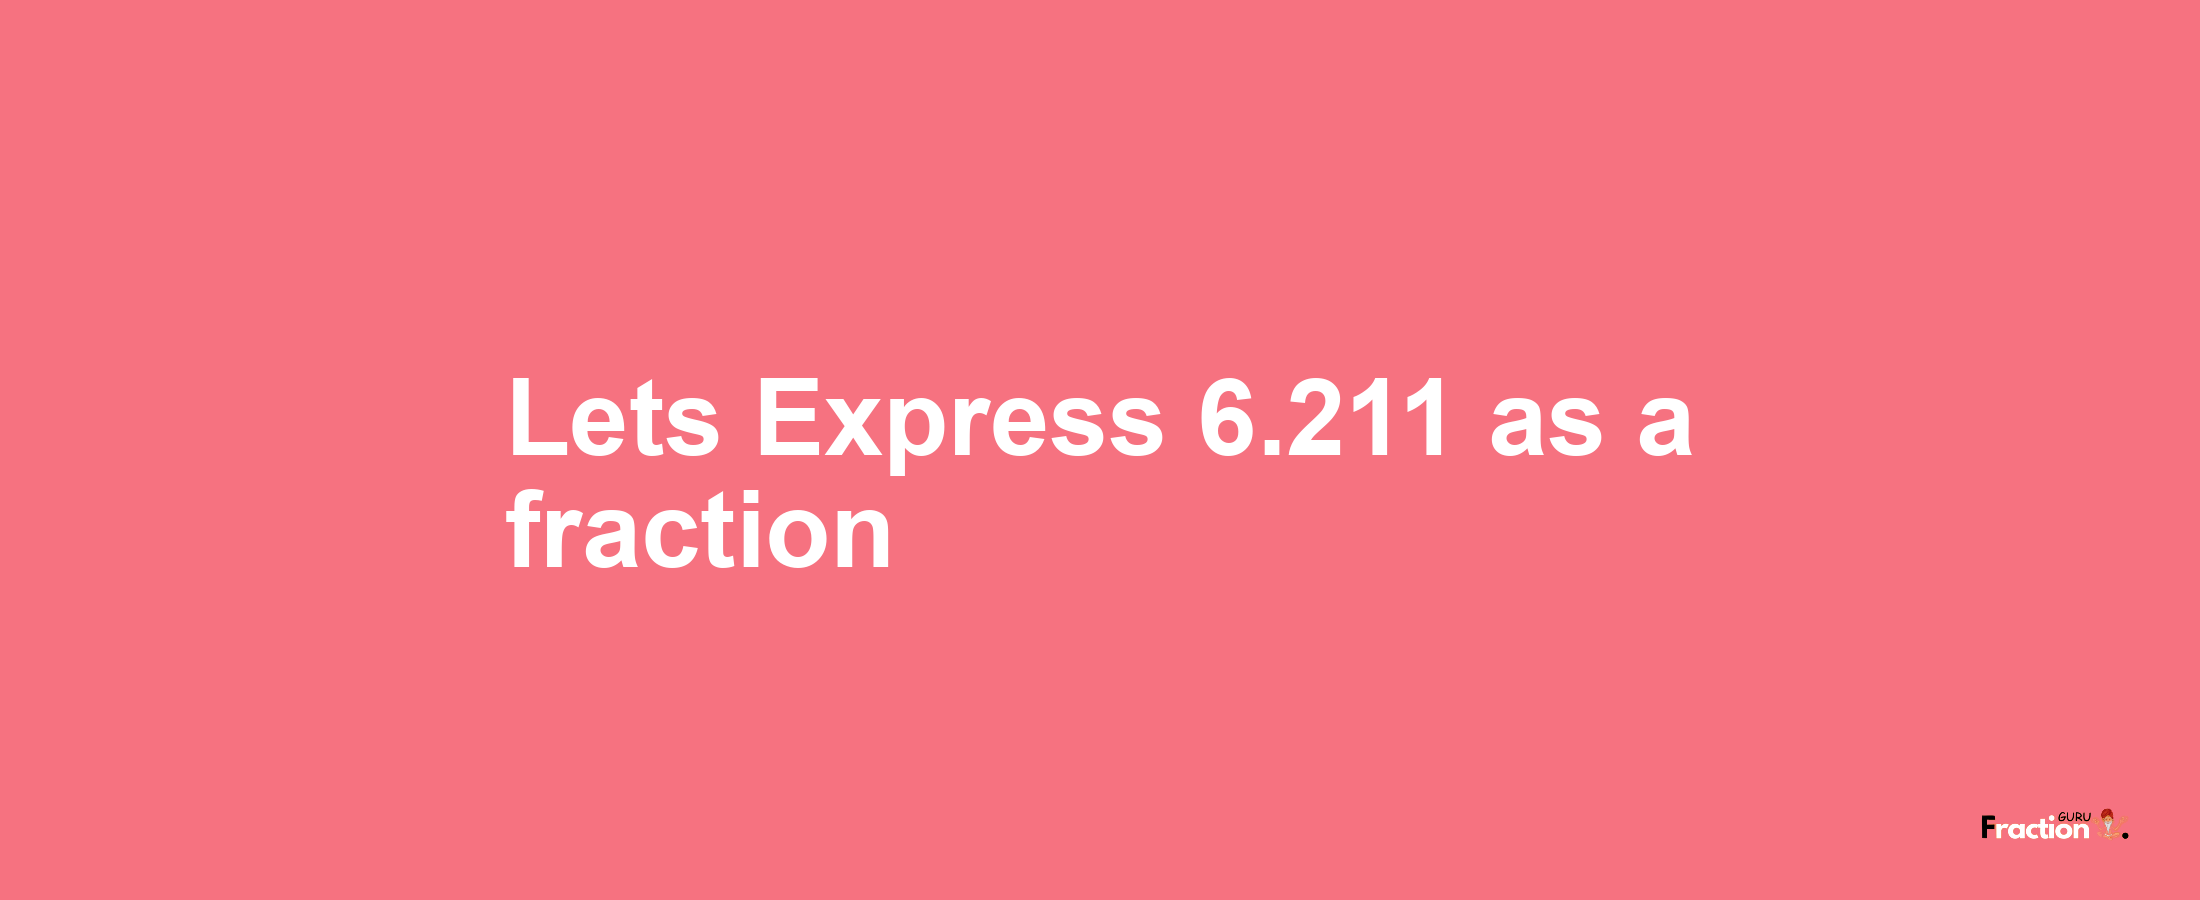 Lets Express 6.211 as afraction